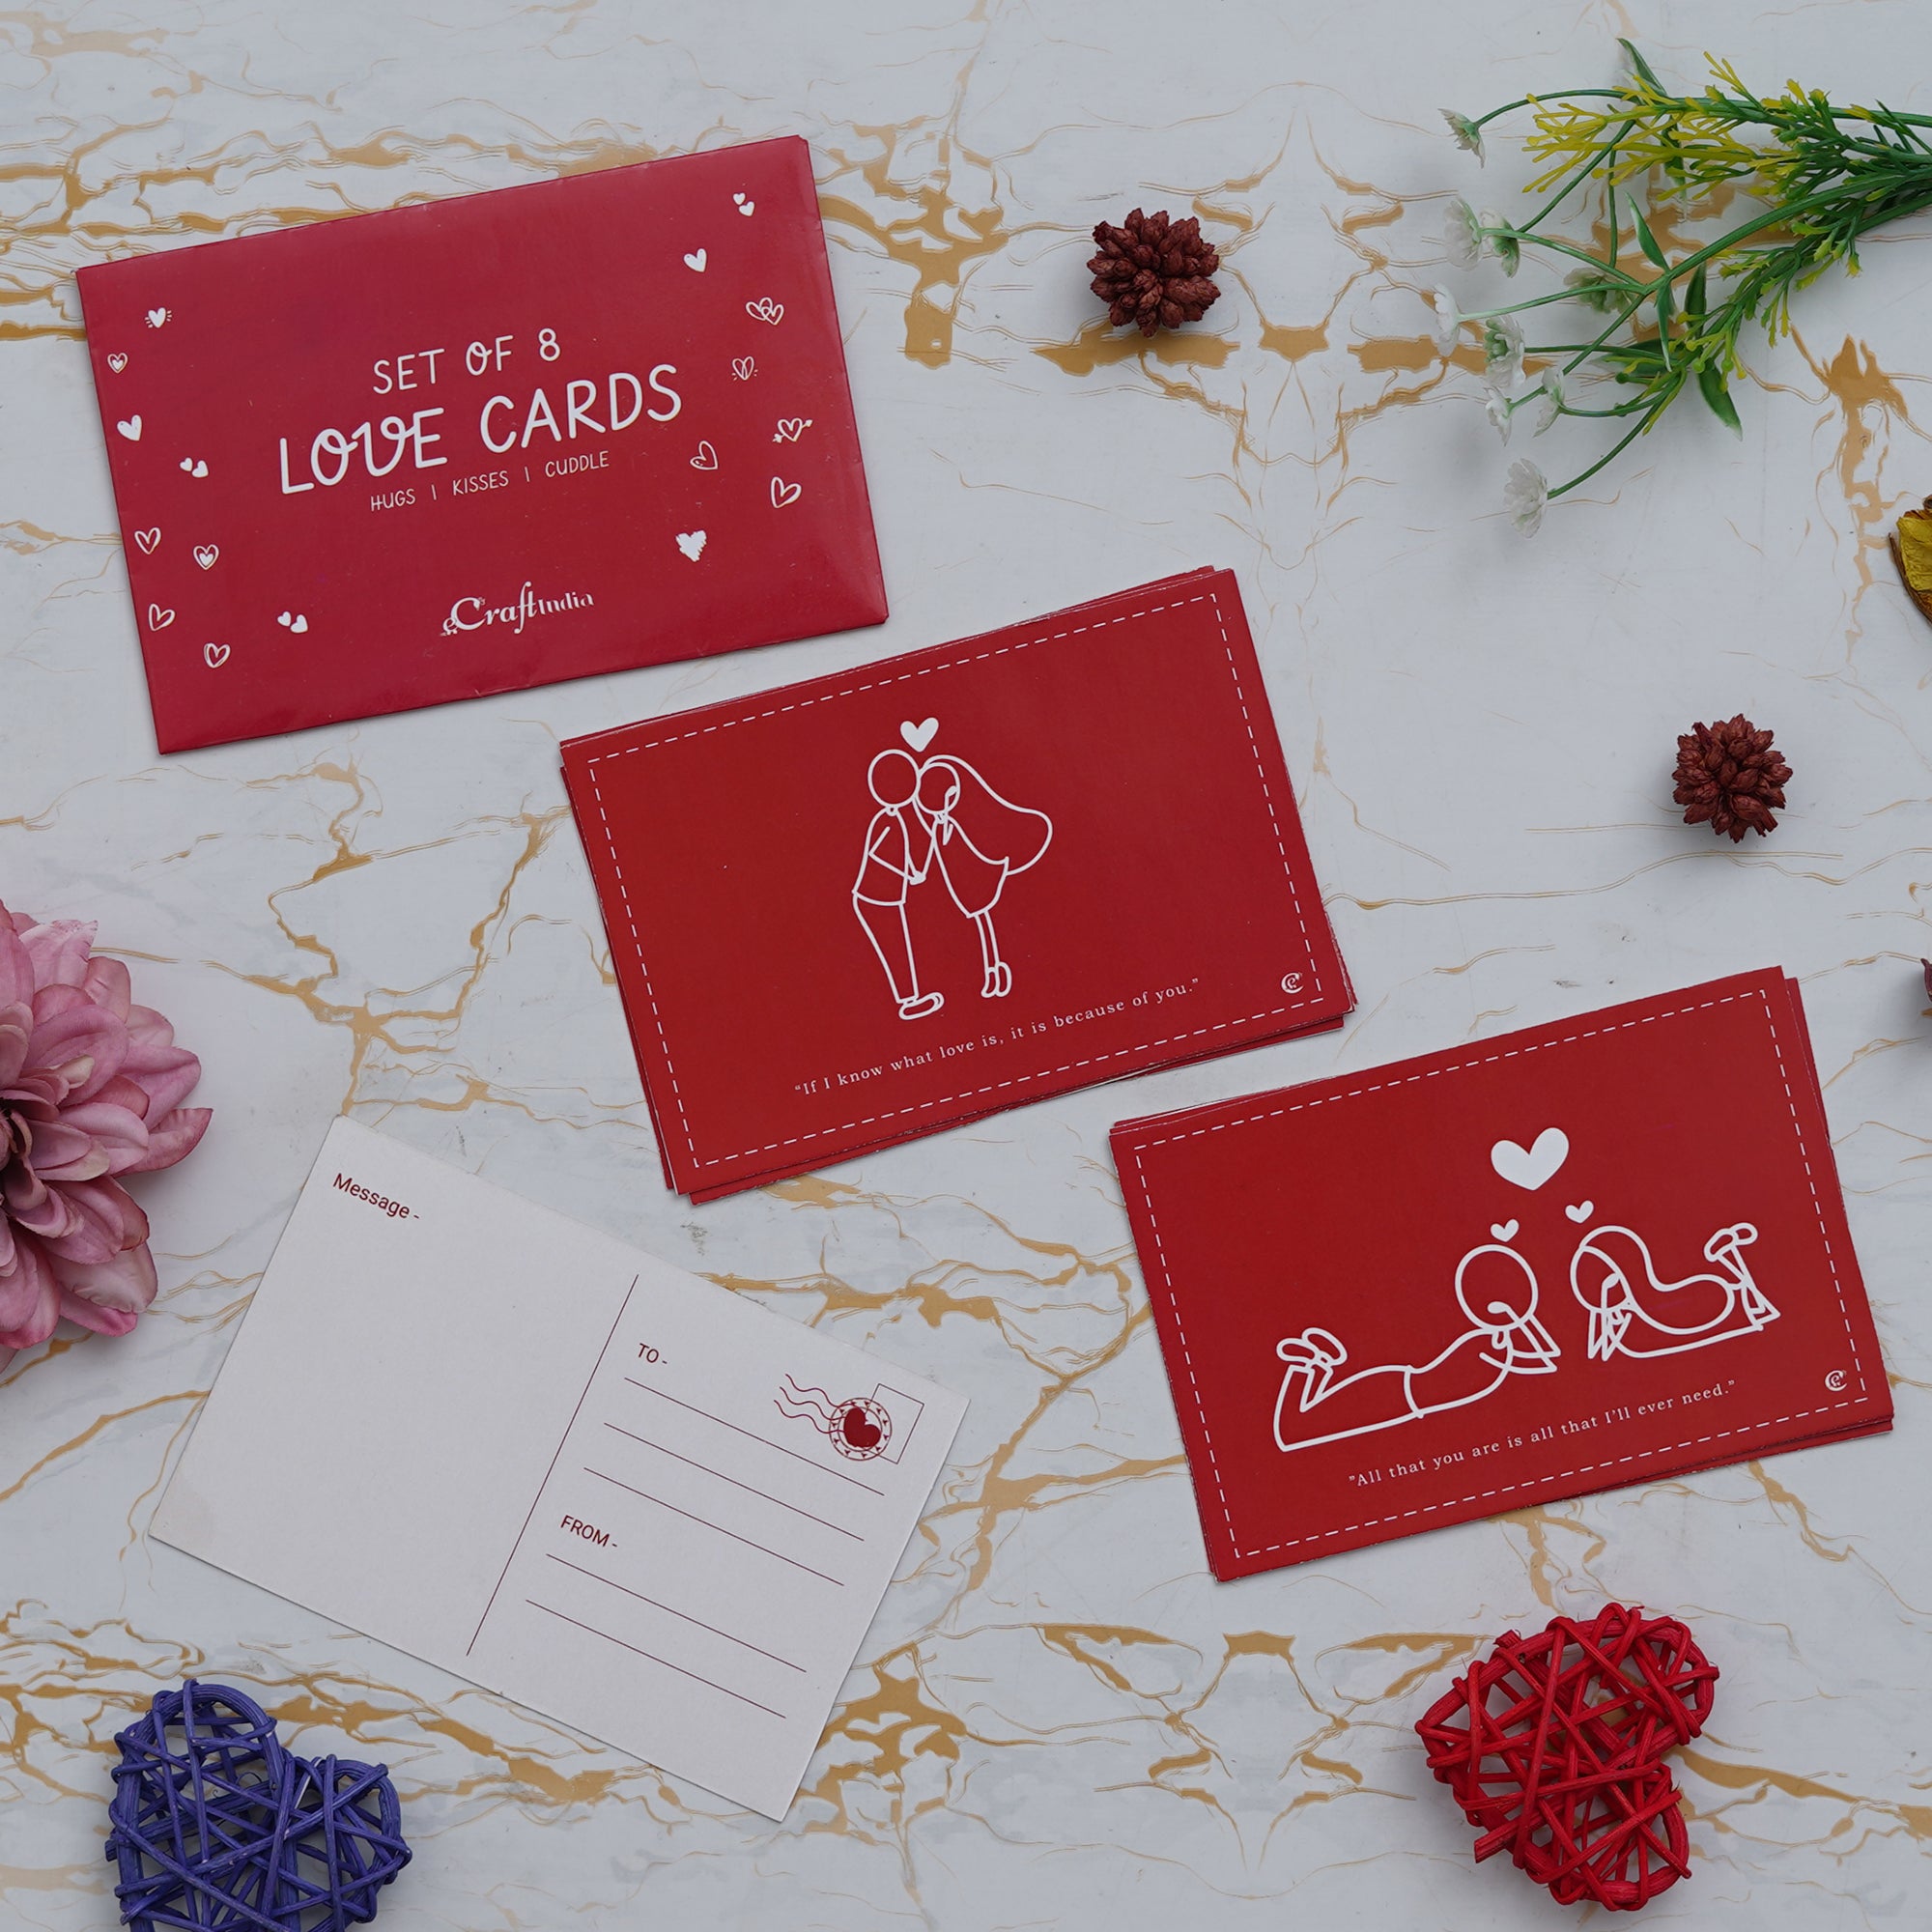 Valentine Combo of Pack of 8 Love Gift Cards, Golden Red Rose Gift Set, "20 Reasons Why I Love You" Printed on Little Red Hearts Decorative Wooden Gift Set Box 1